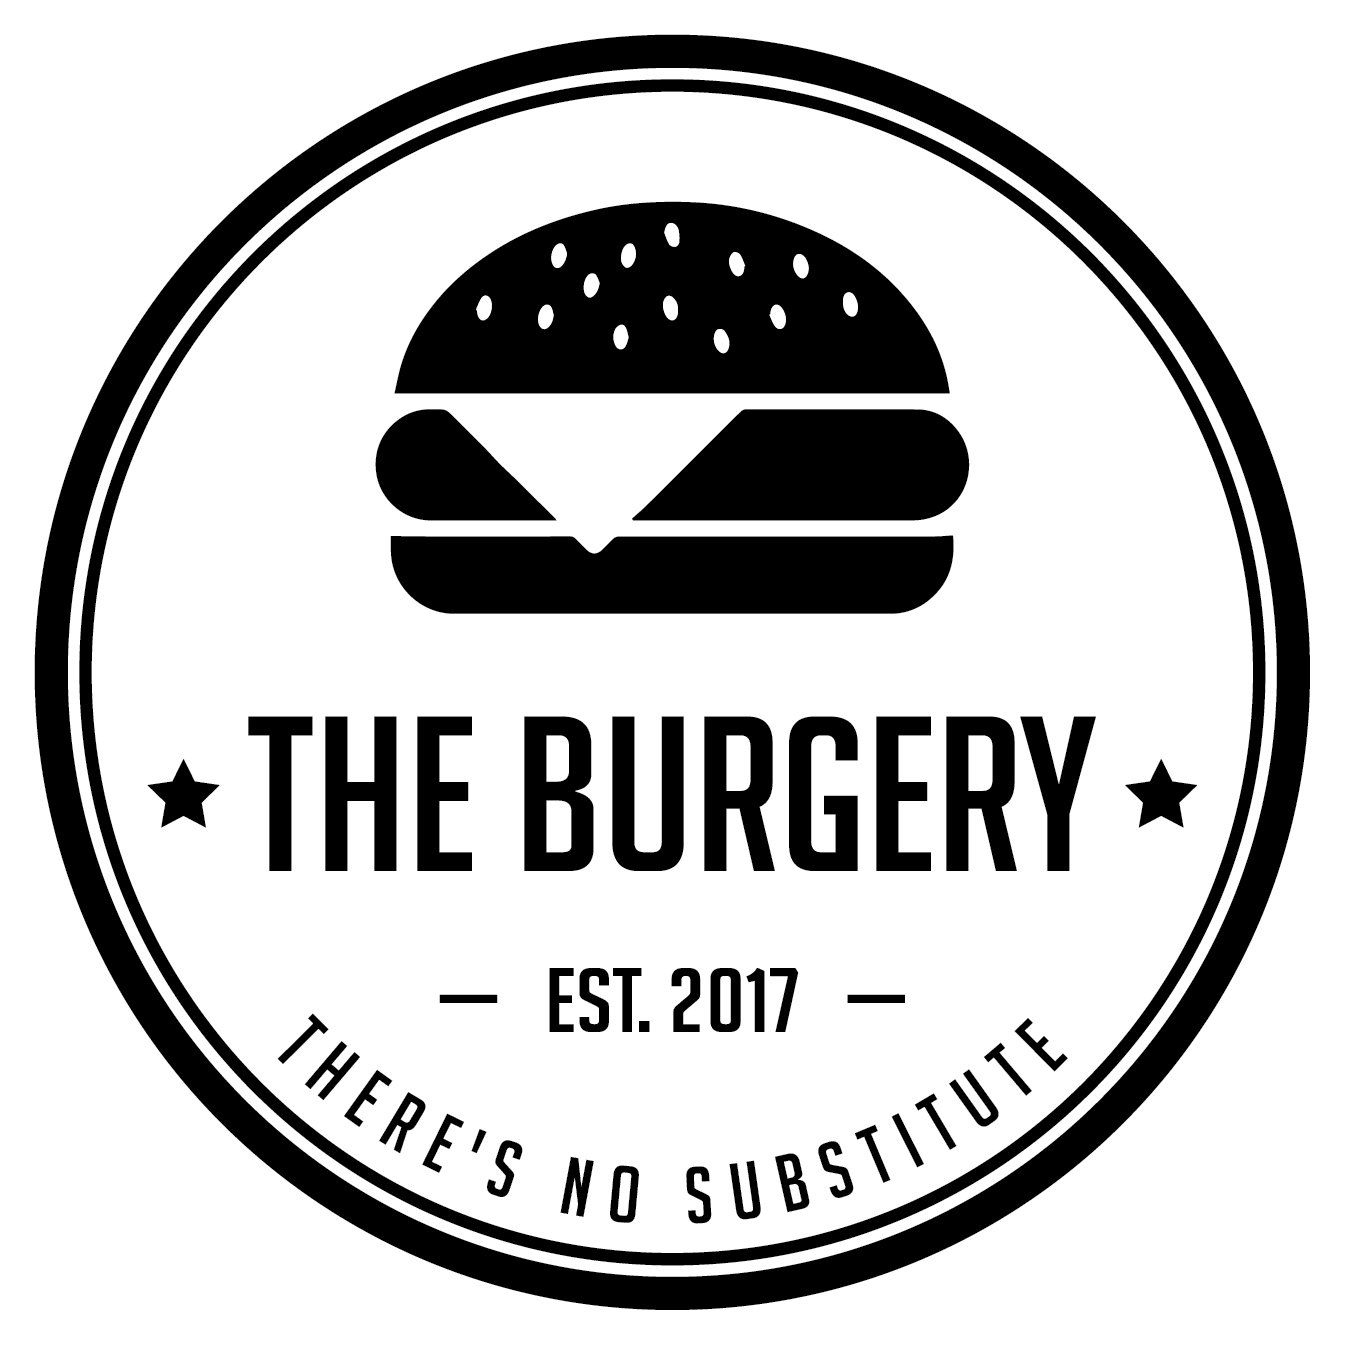 Born-and-bred-in-Wellington foodies offering kiwi style gourmet burgers on Wellington's Waterfront.
Most active on Instagram @theburgerynz.